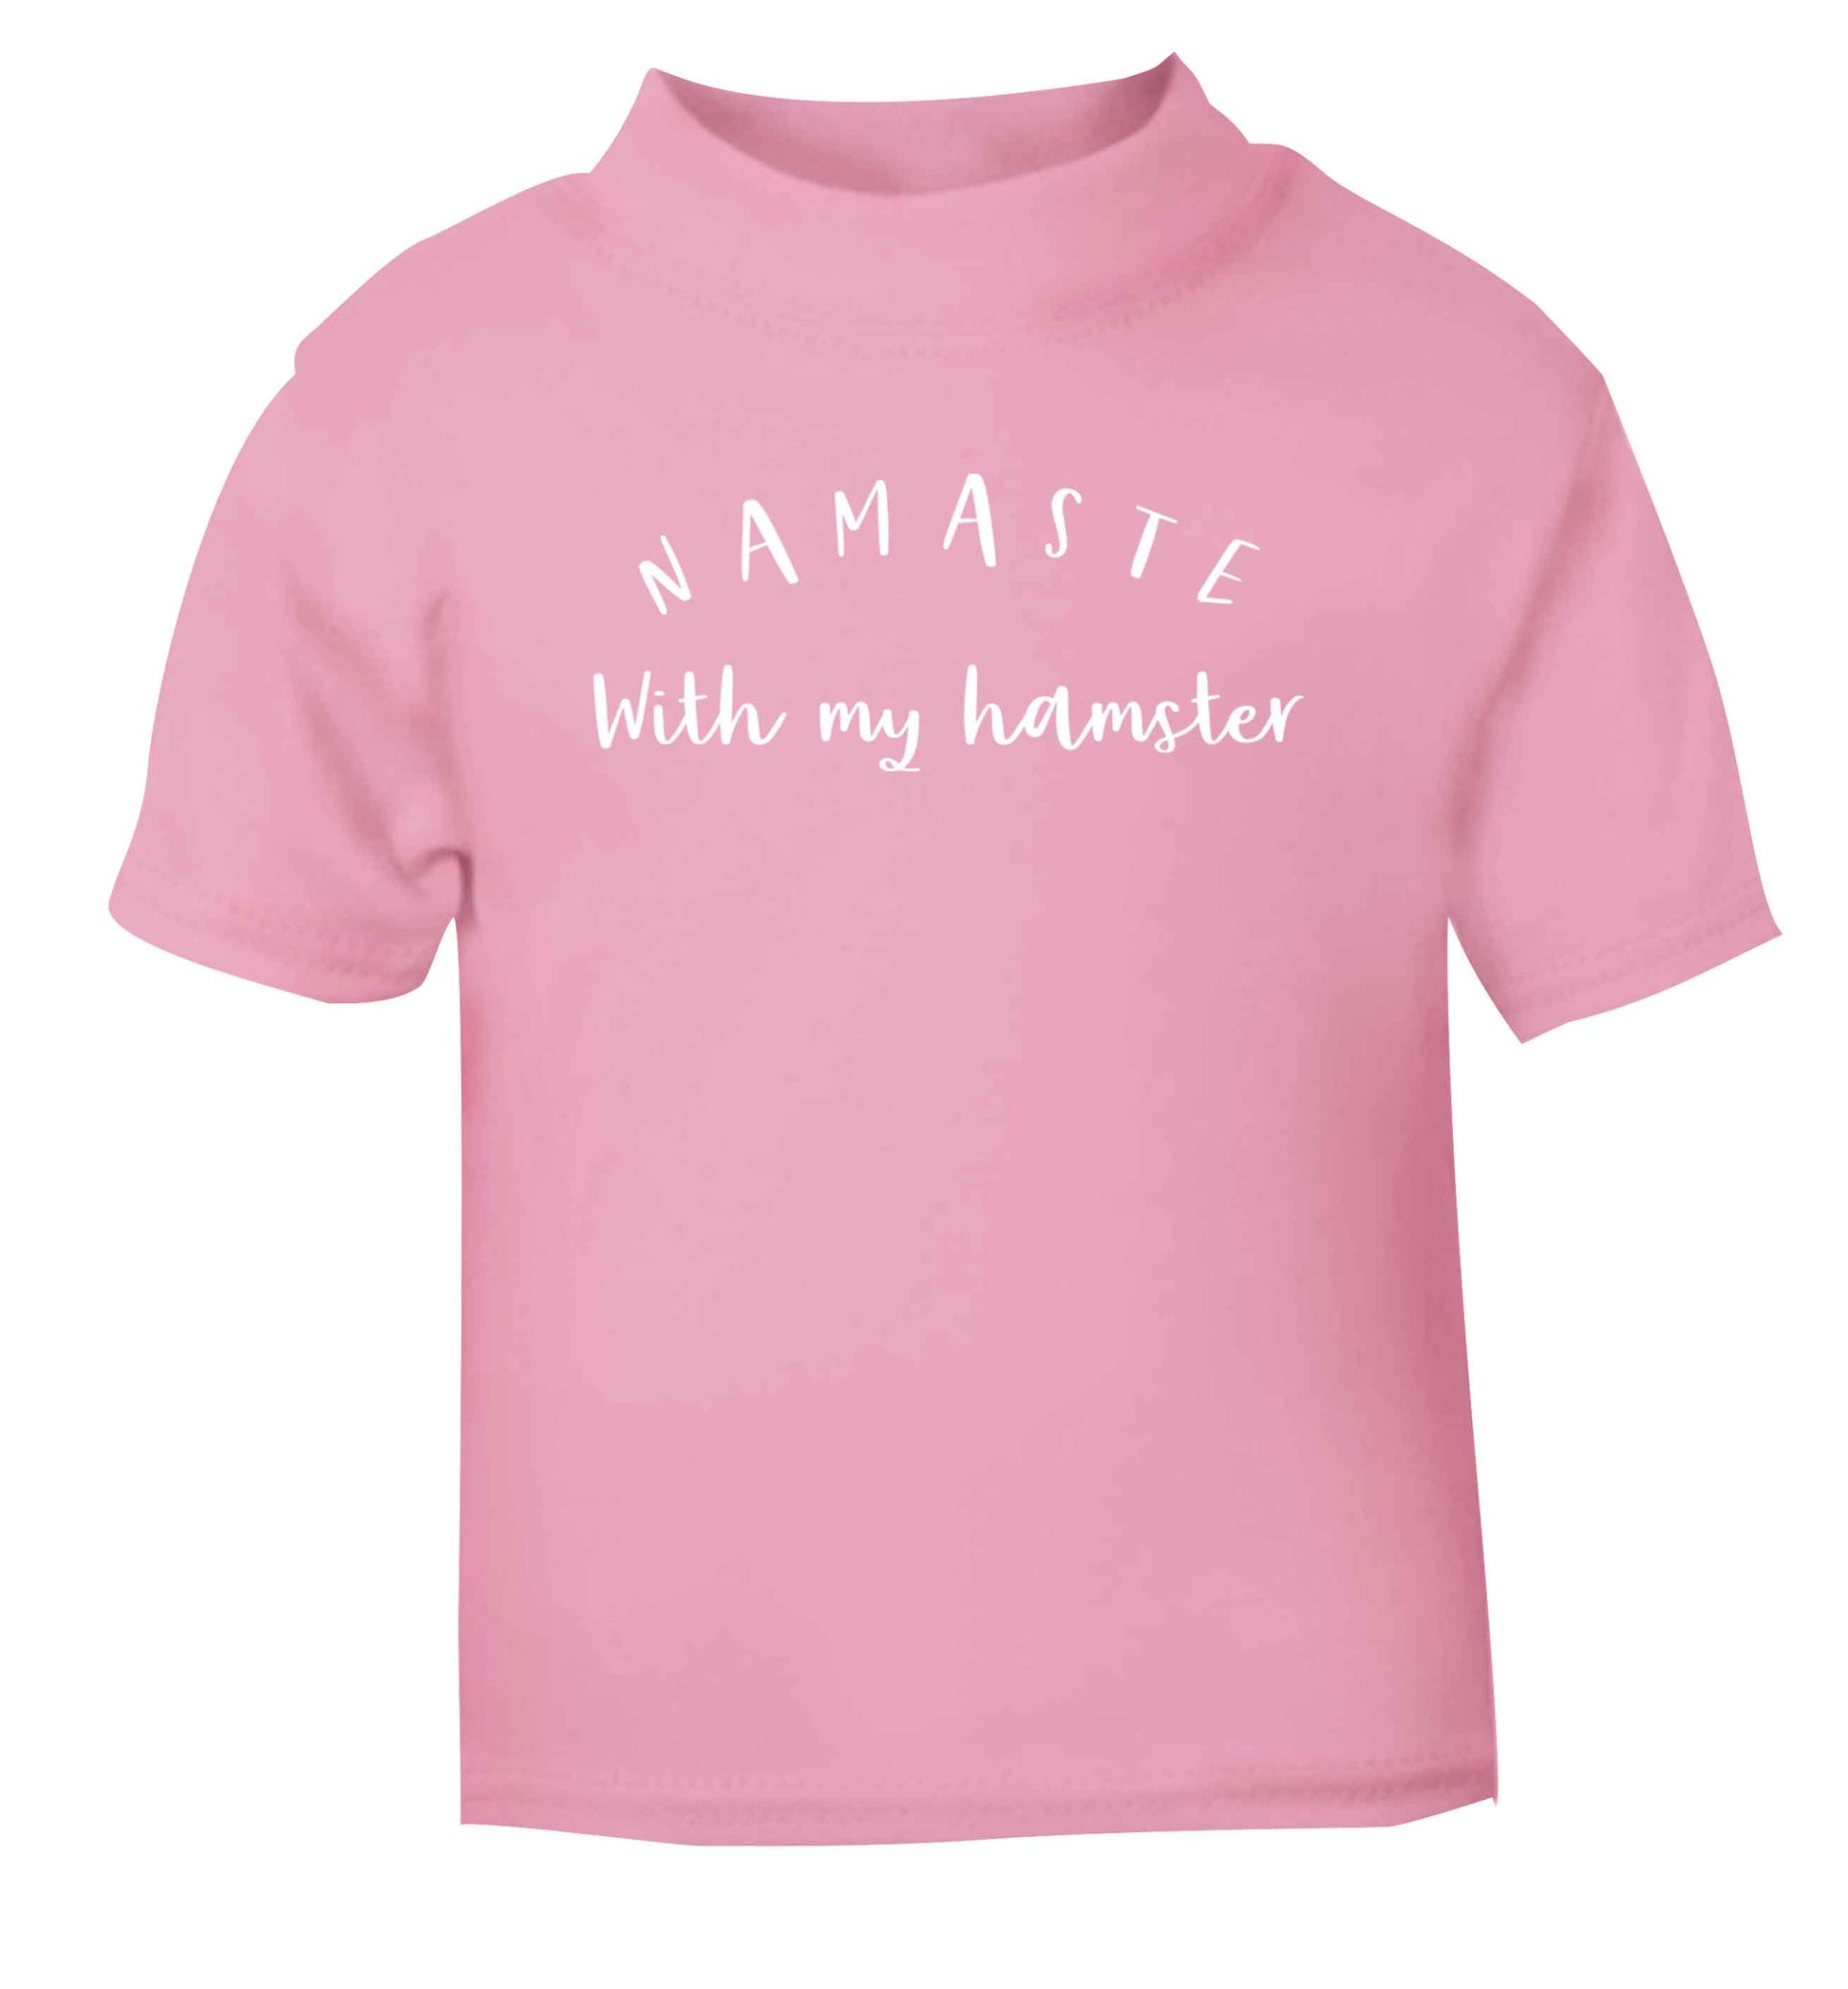 Namaste with my hamster light pink Baby Toddler Tshirt 2 Years